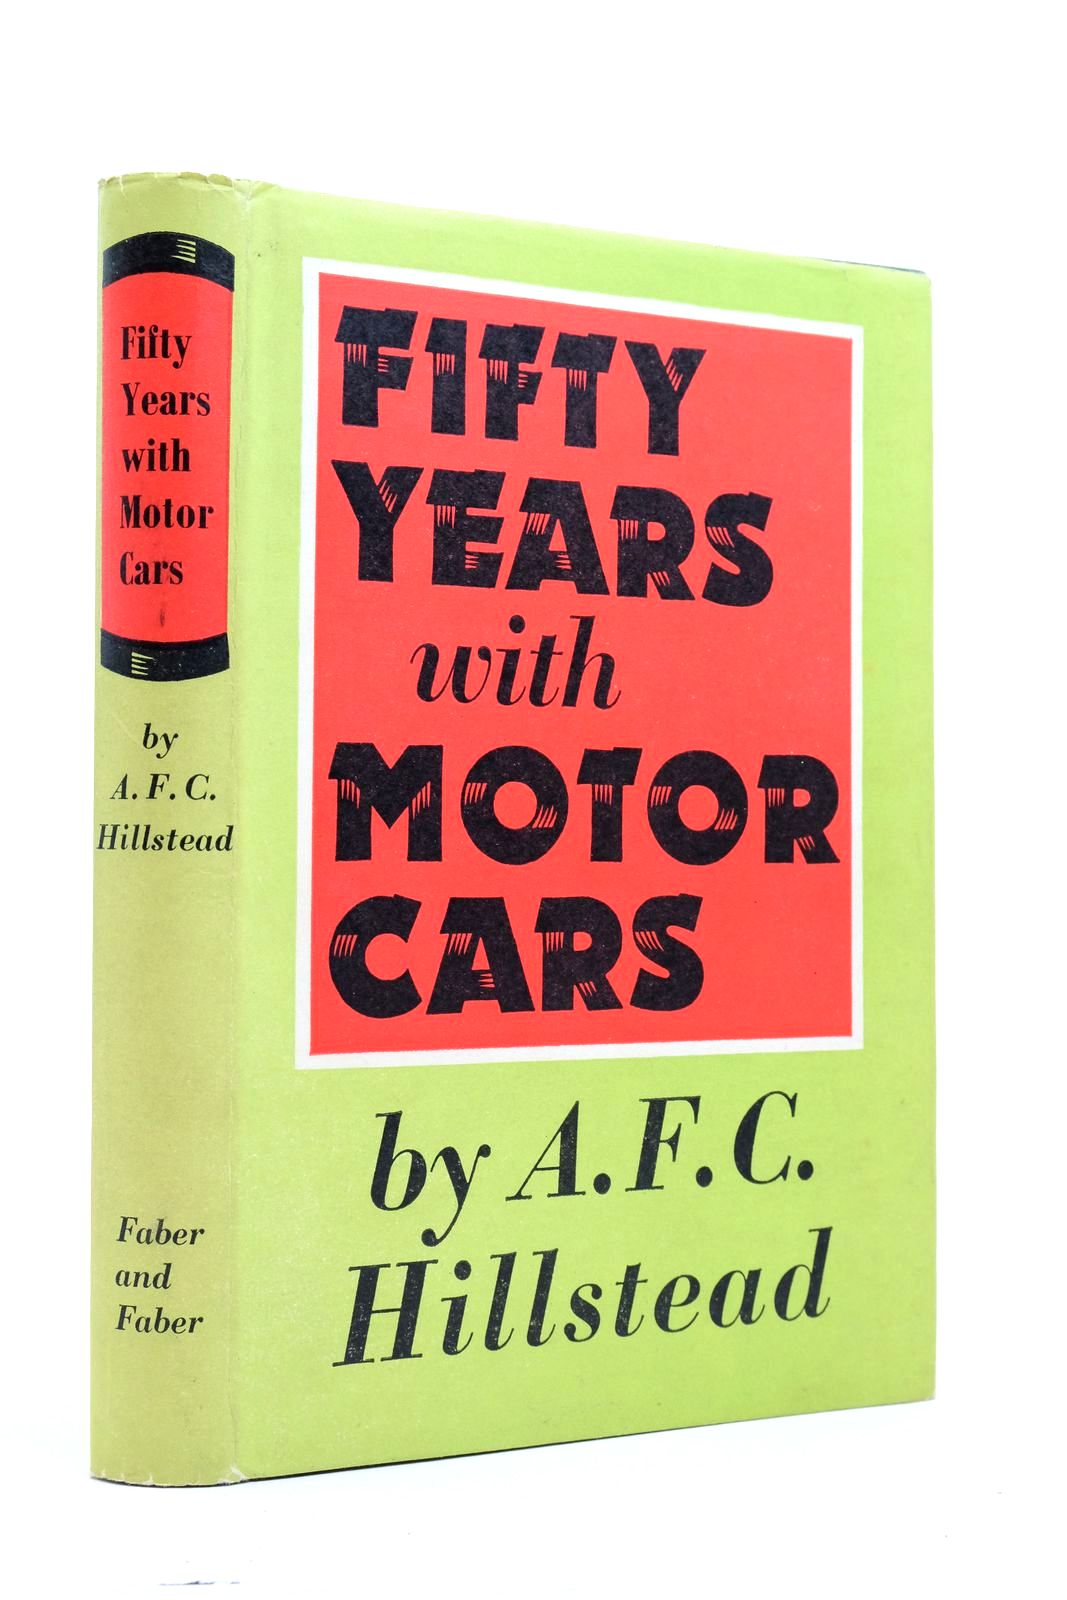 Photo of FIFTY YEARS WITH MOTOR CARS written by Hillstead, A.F.C. published by Faber & Faber (STOCK CODE: 2139877)  for sale by Stella & Rose's Books